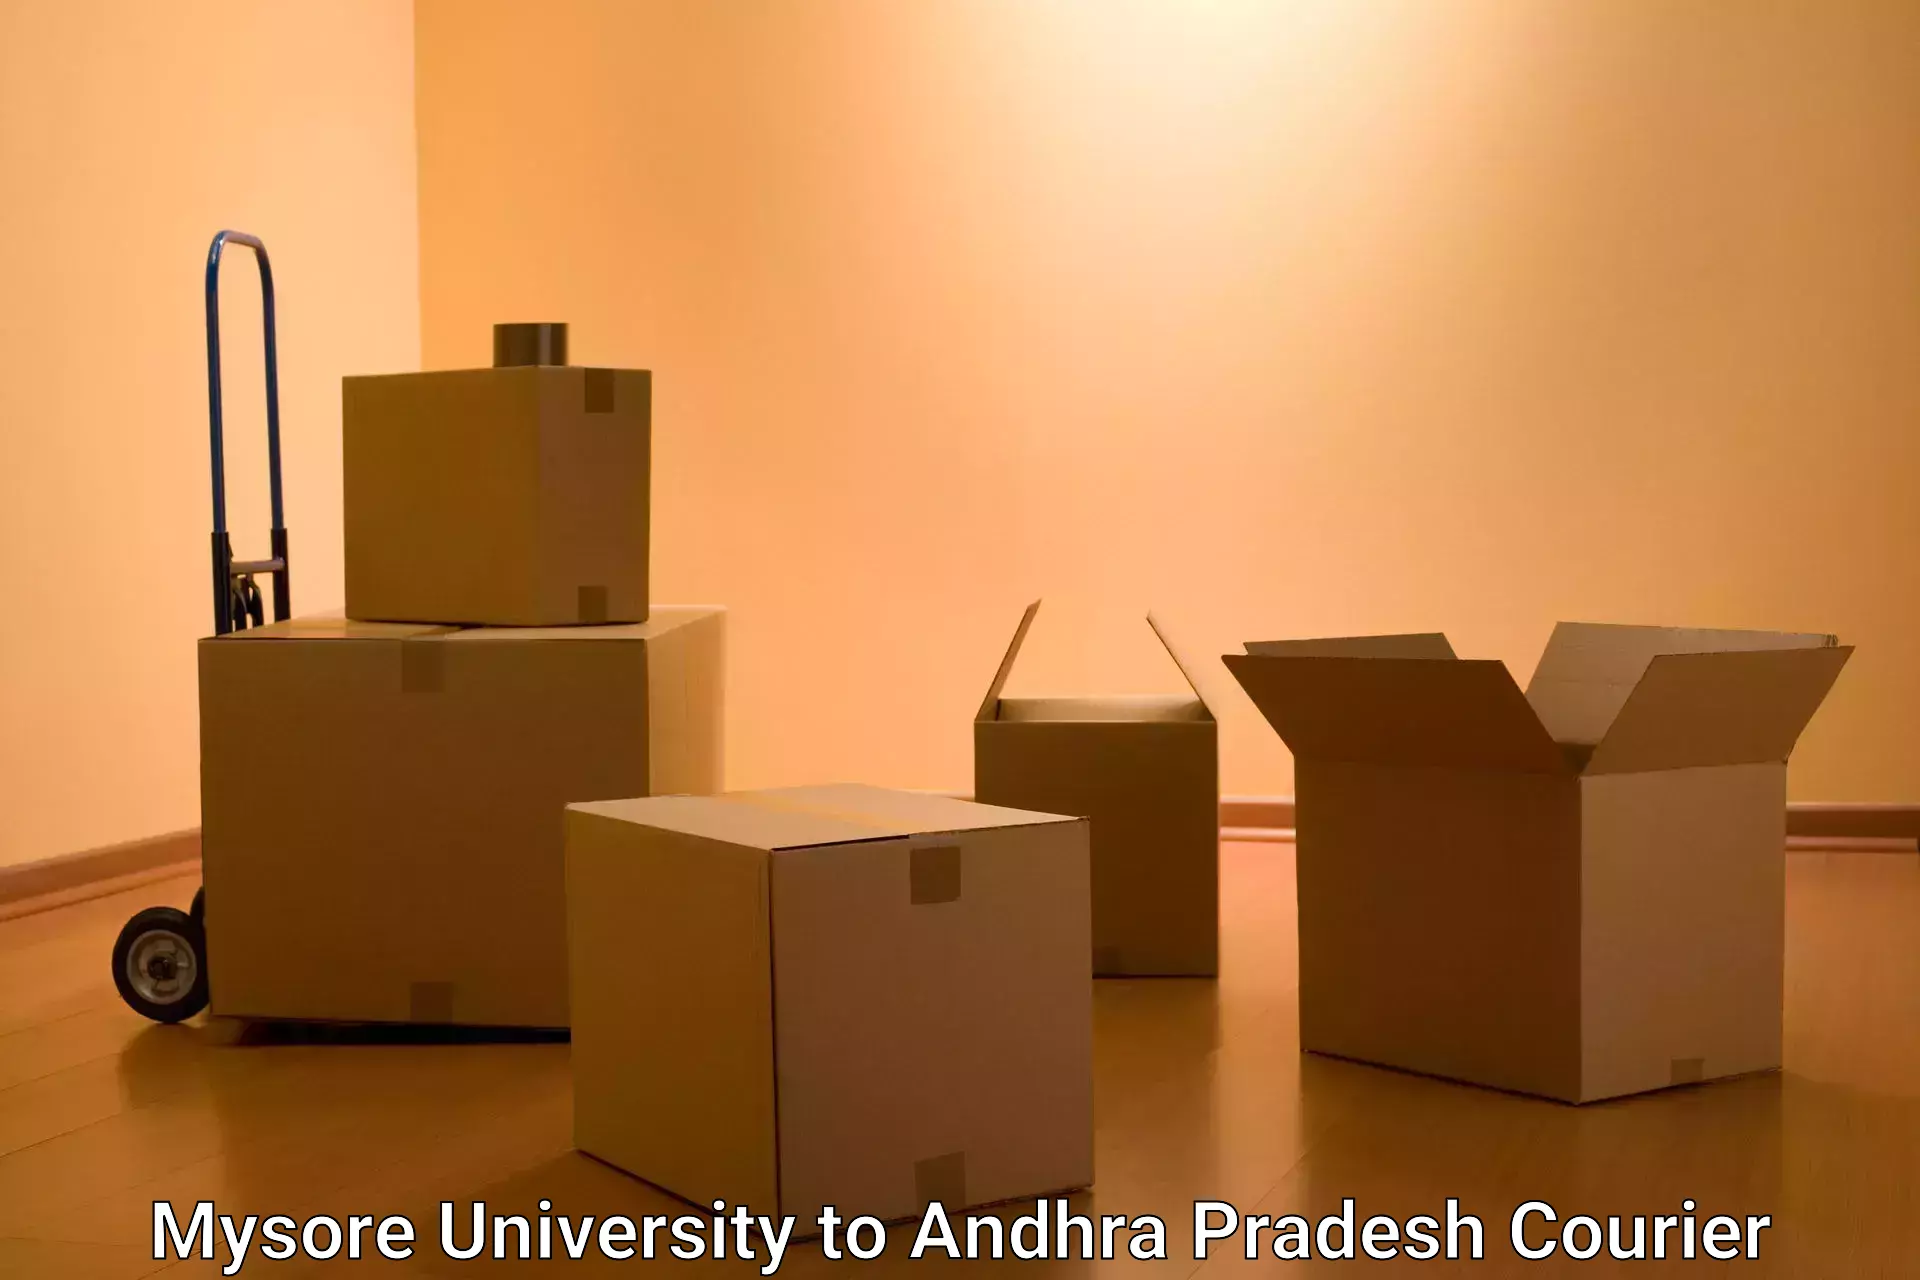 Advanced freight services in Mysore University to Anantapur